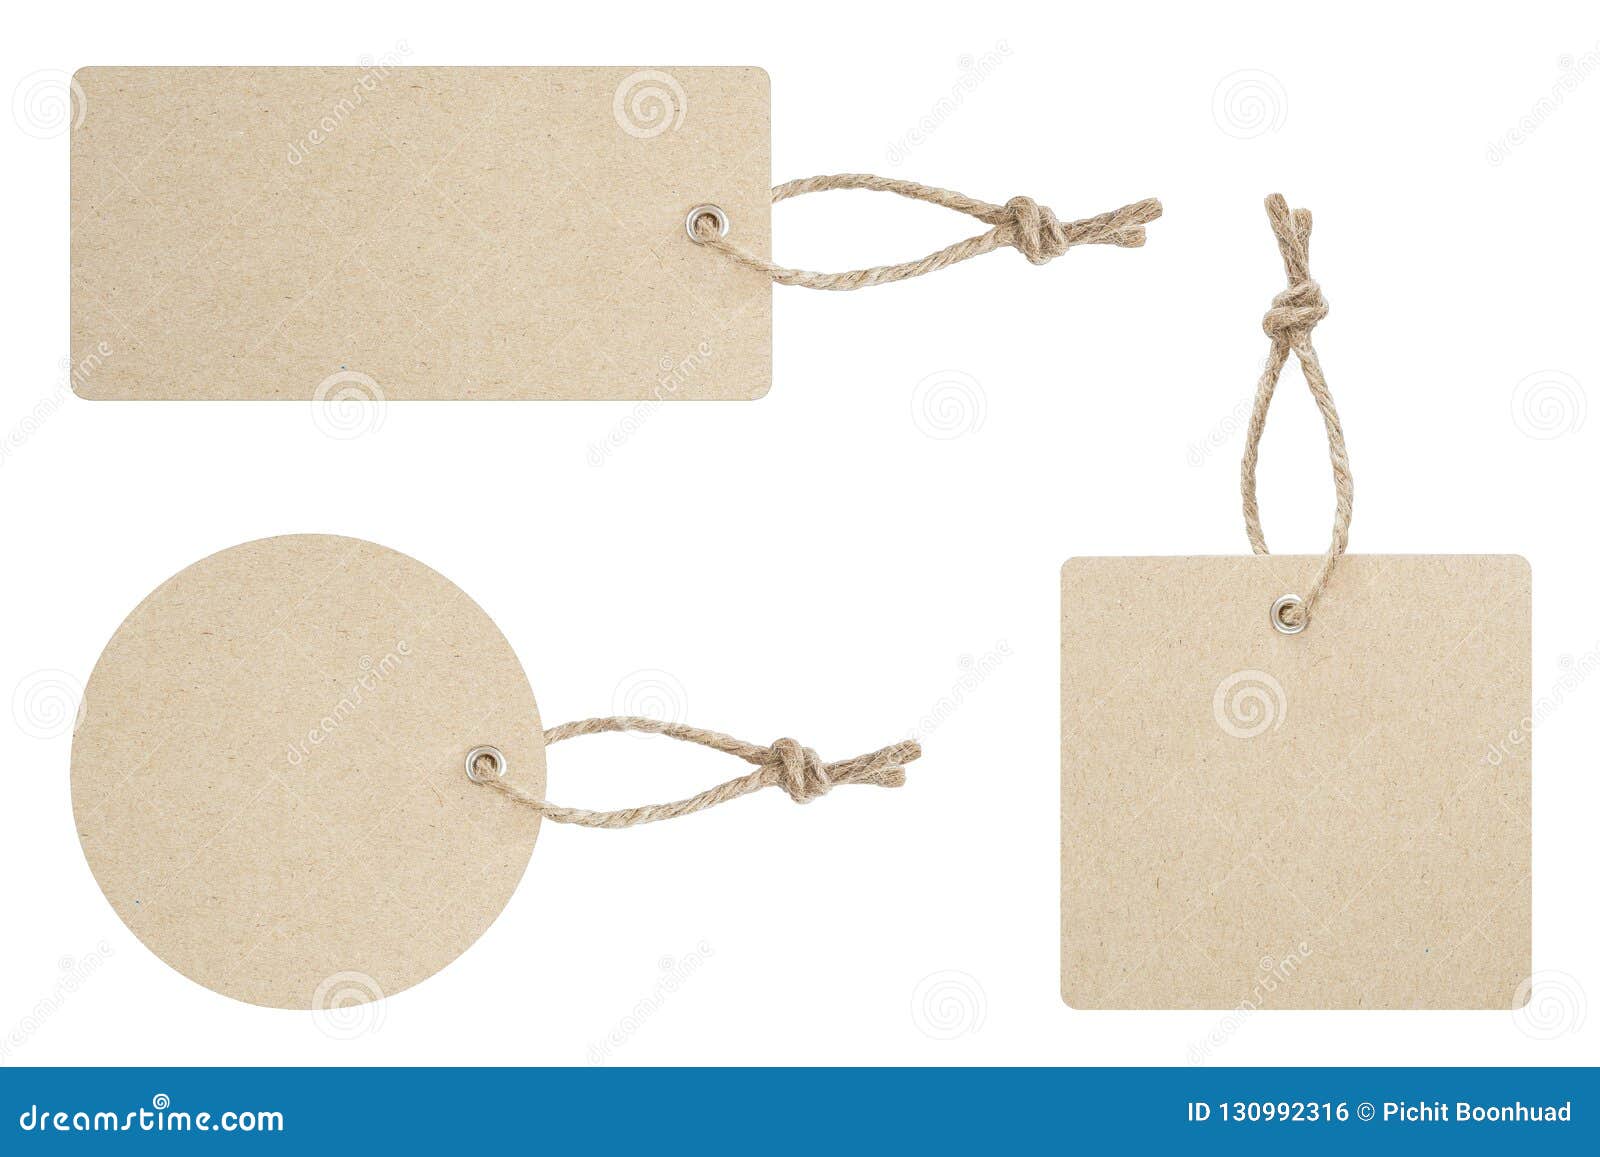 blank tag tied for hang on product for show price or discount isolate on white background with clipping path.